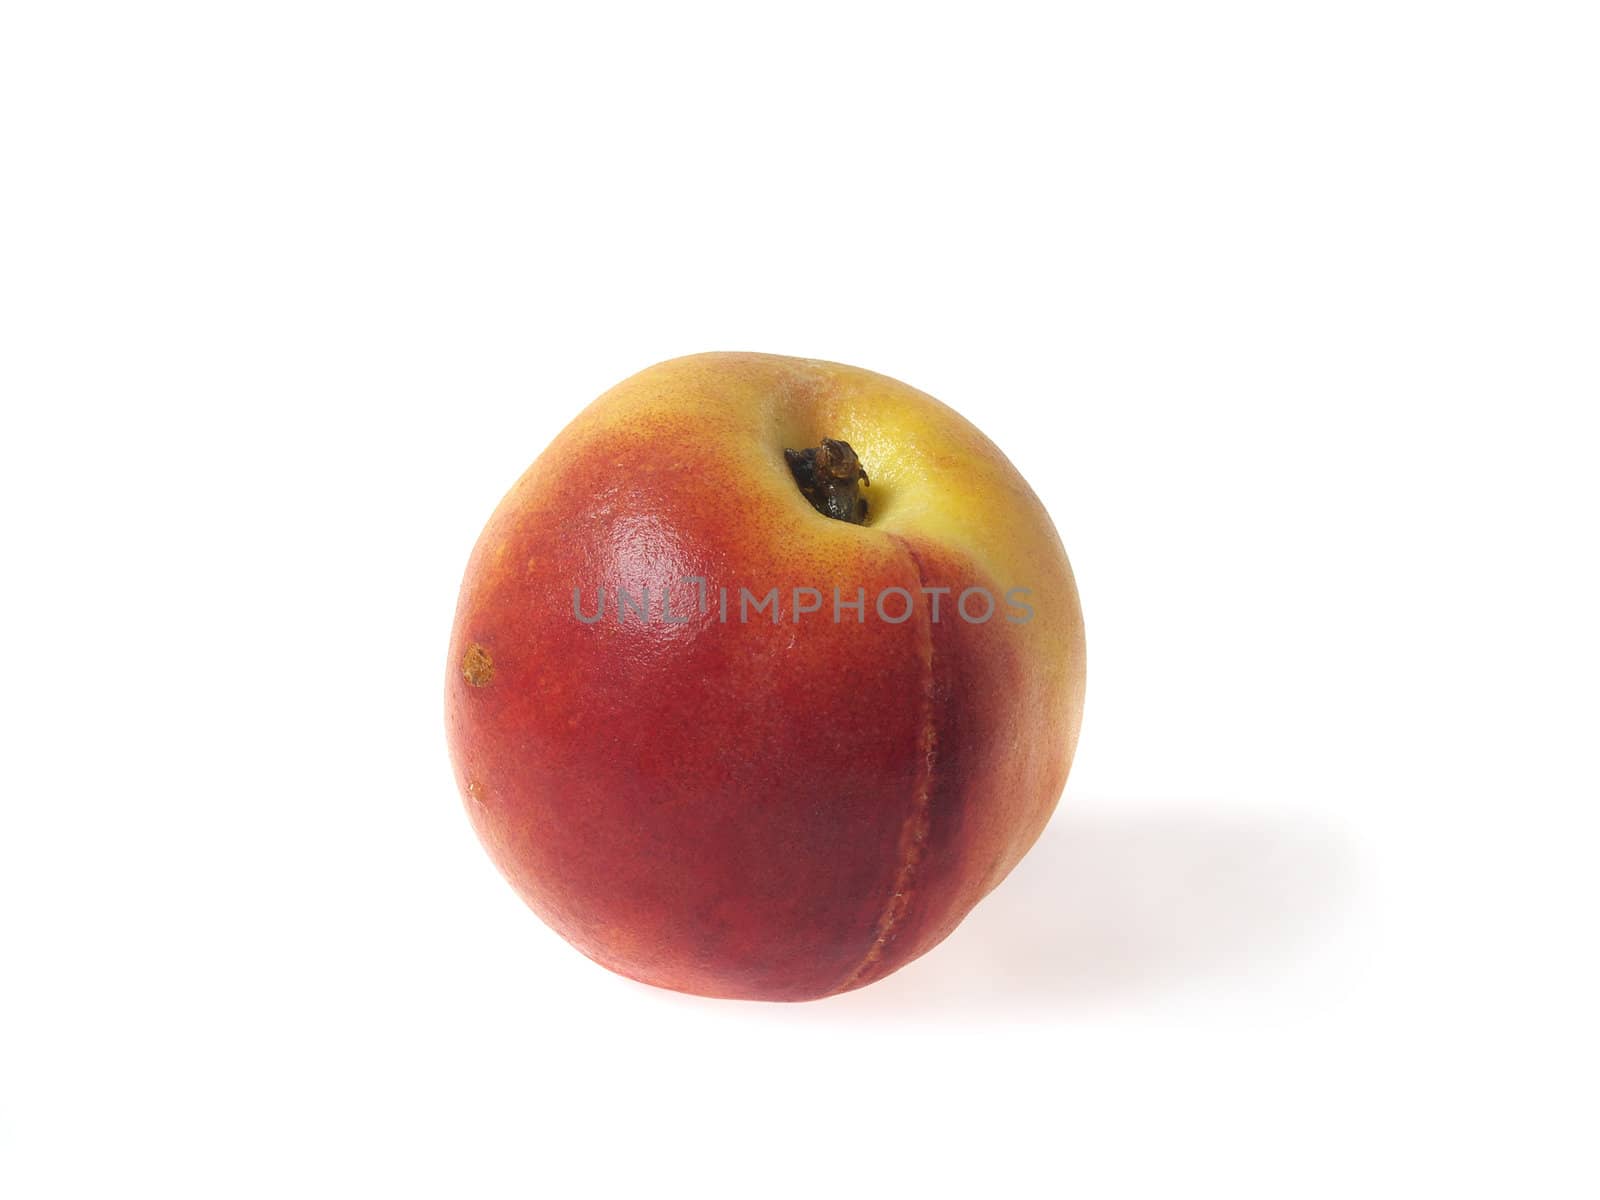 Half of tasty juicy peaches on a white background whith clipping mask. Shadows is not included in clipping mask